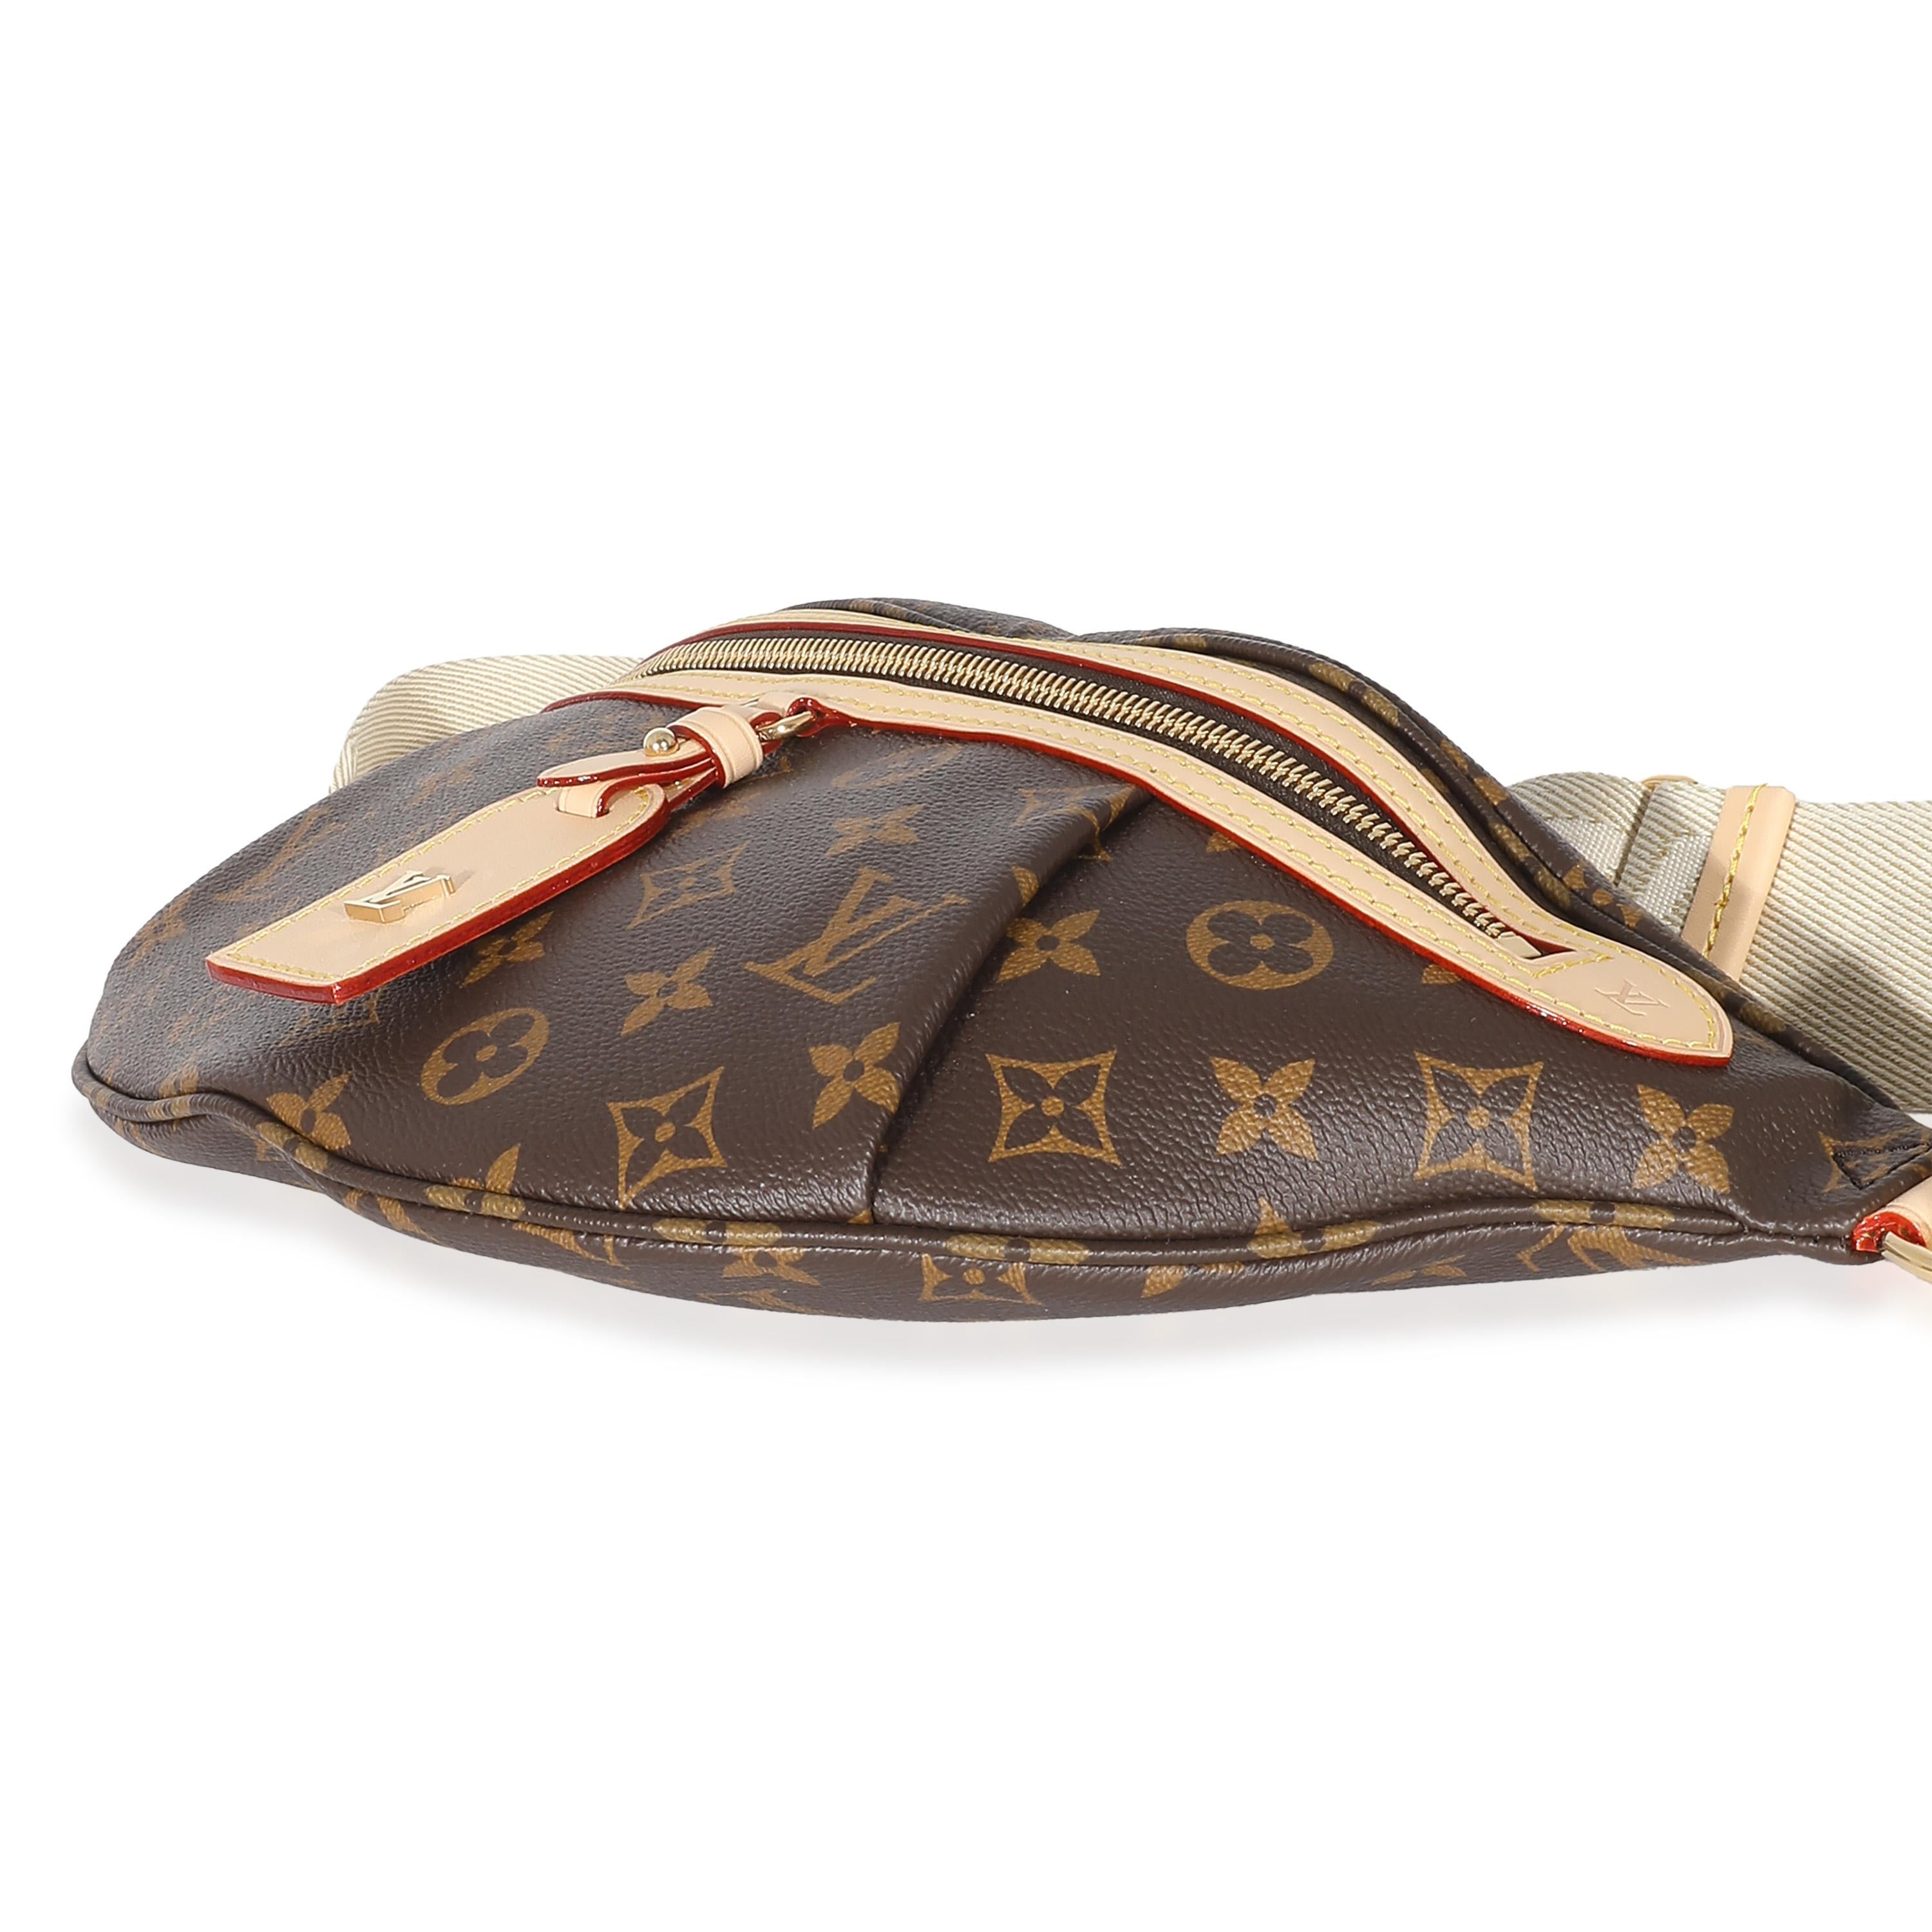 Listing Title: Louis Vuitton Monogram Highrise Bumbag
SKU: 135127
Condition: Pre-owned 
Handbag Condition: Pristine
Condition Comments: Item has no indication of wear. No visible signs of wear.
Brand: Louis Vuitton
Model: Highrise Bumbag
Origin